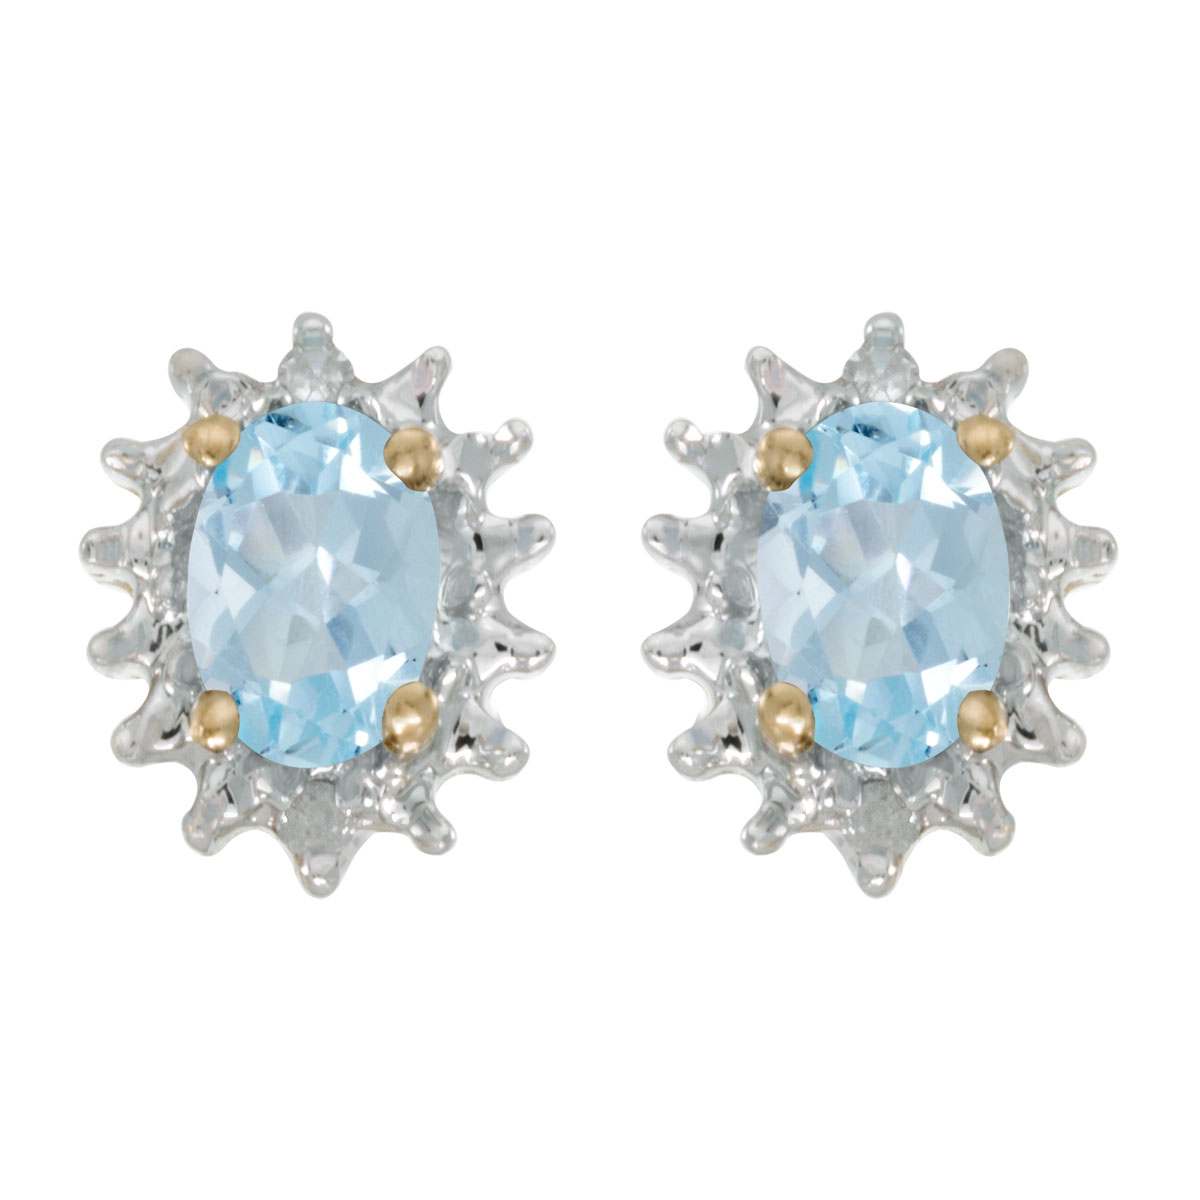 These 14k yellow gold oval aquamarine and diamond earrings feature 6x4 mm genuine natural aquamarines with a 0.58 ct total weight and .04 ct diamonds.